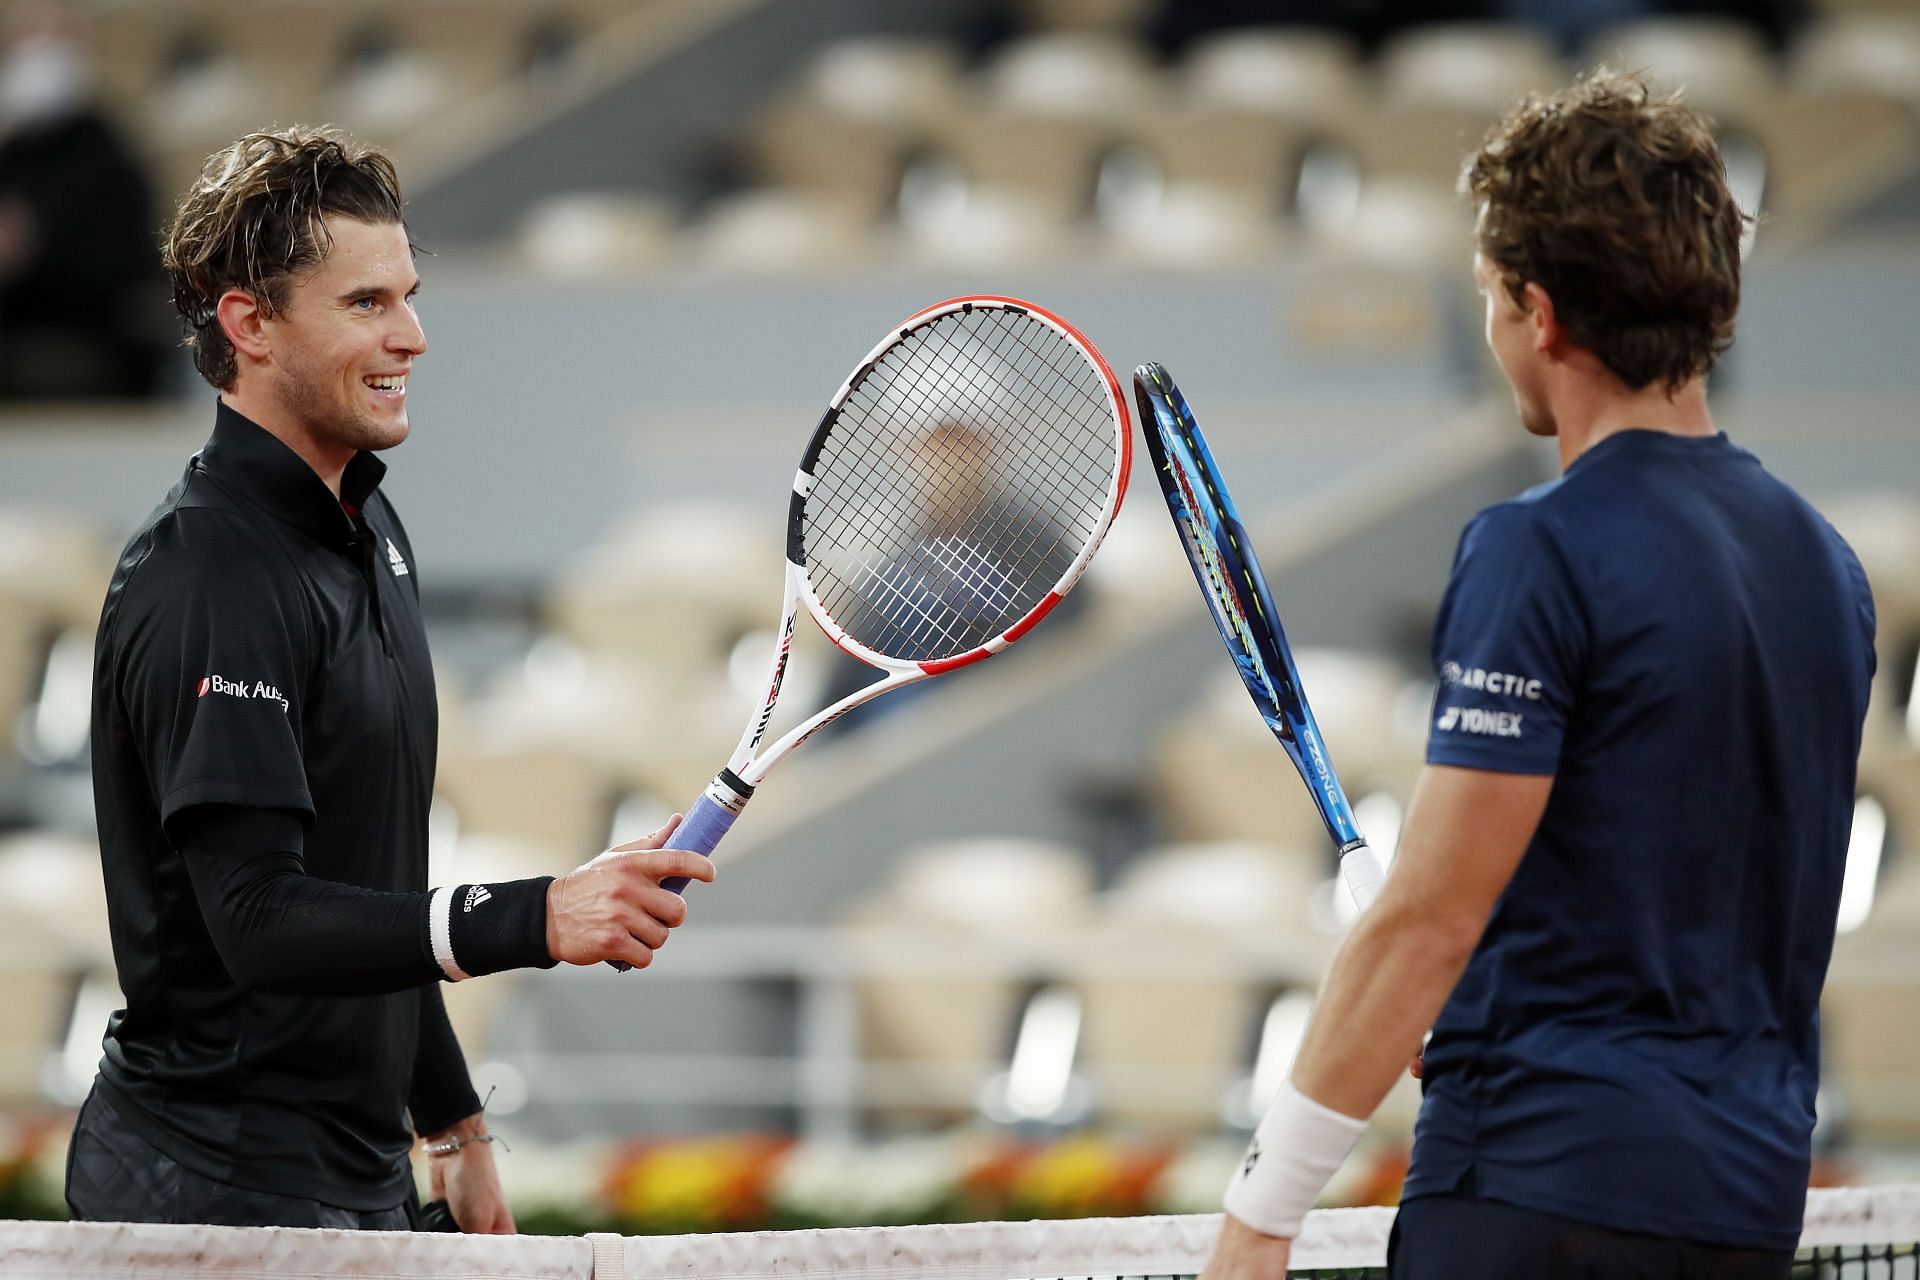 Dominic Thiem (left) and Casper Ruud (right) after their third-round match at the 2020 French Open